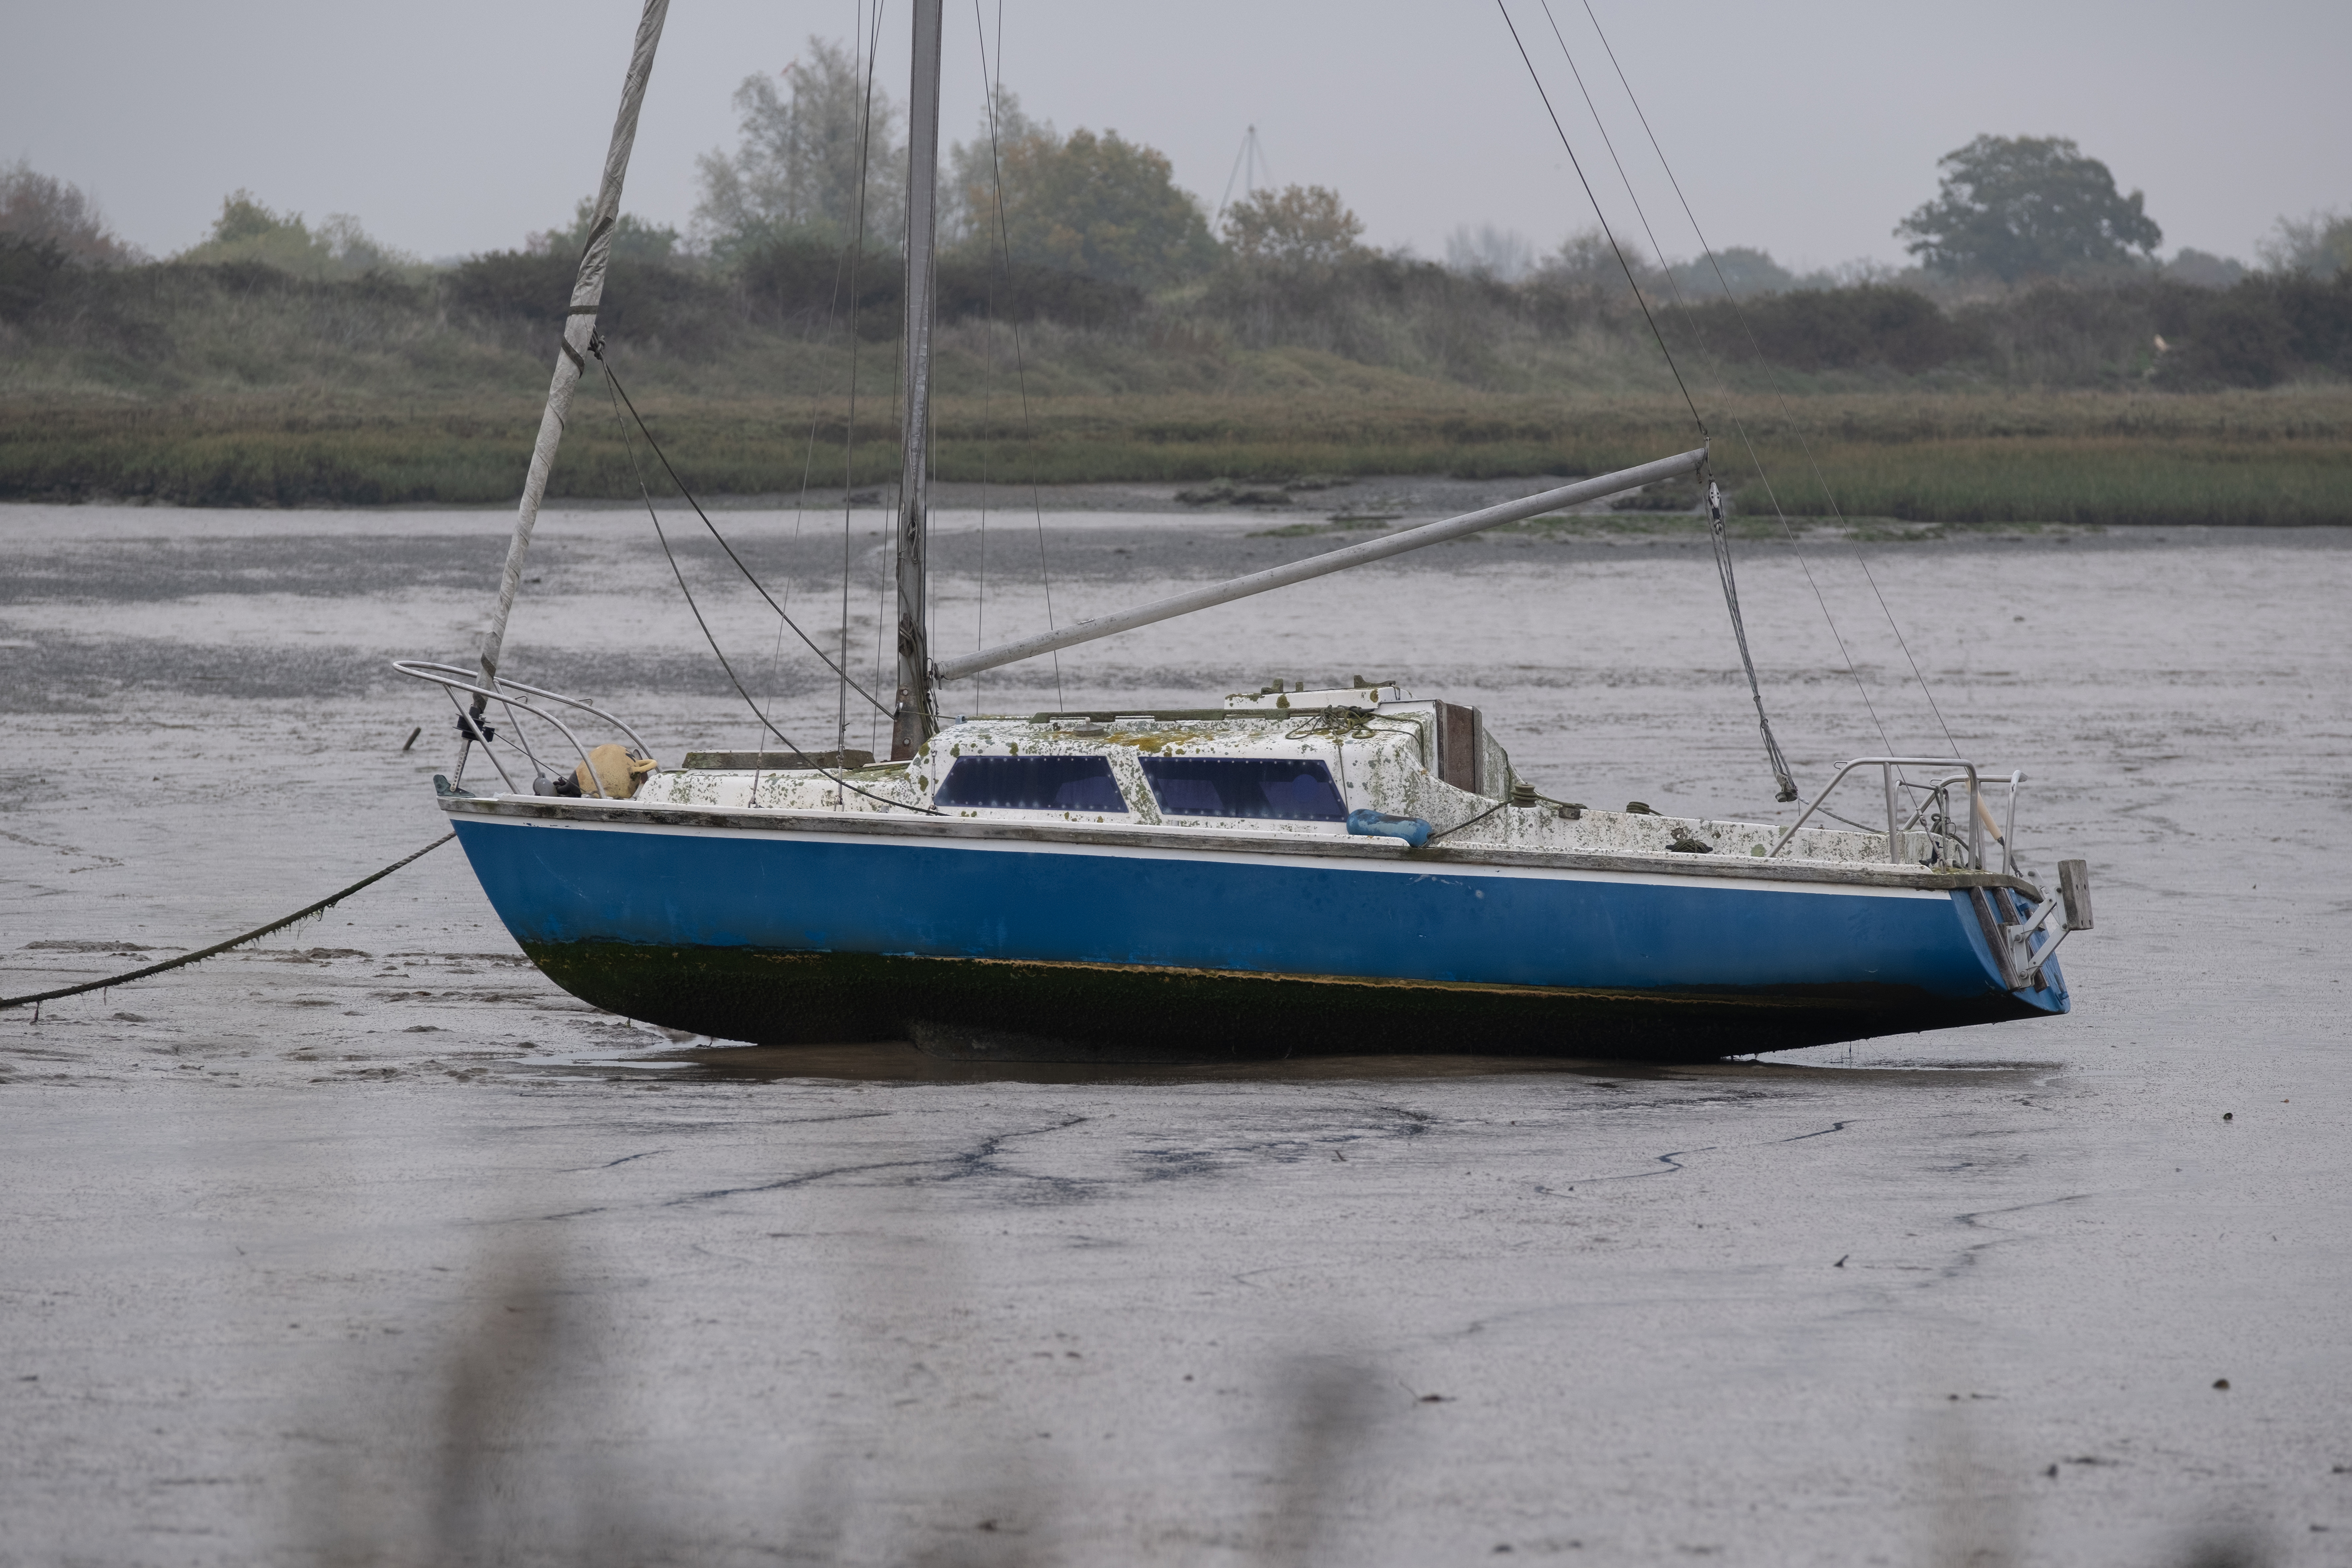 A boat on mud flats at low tide